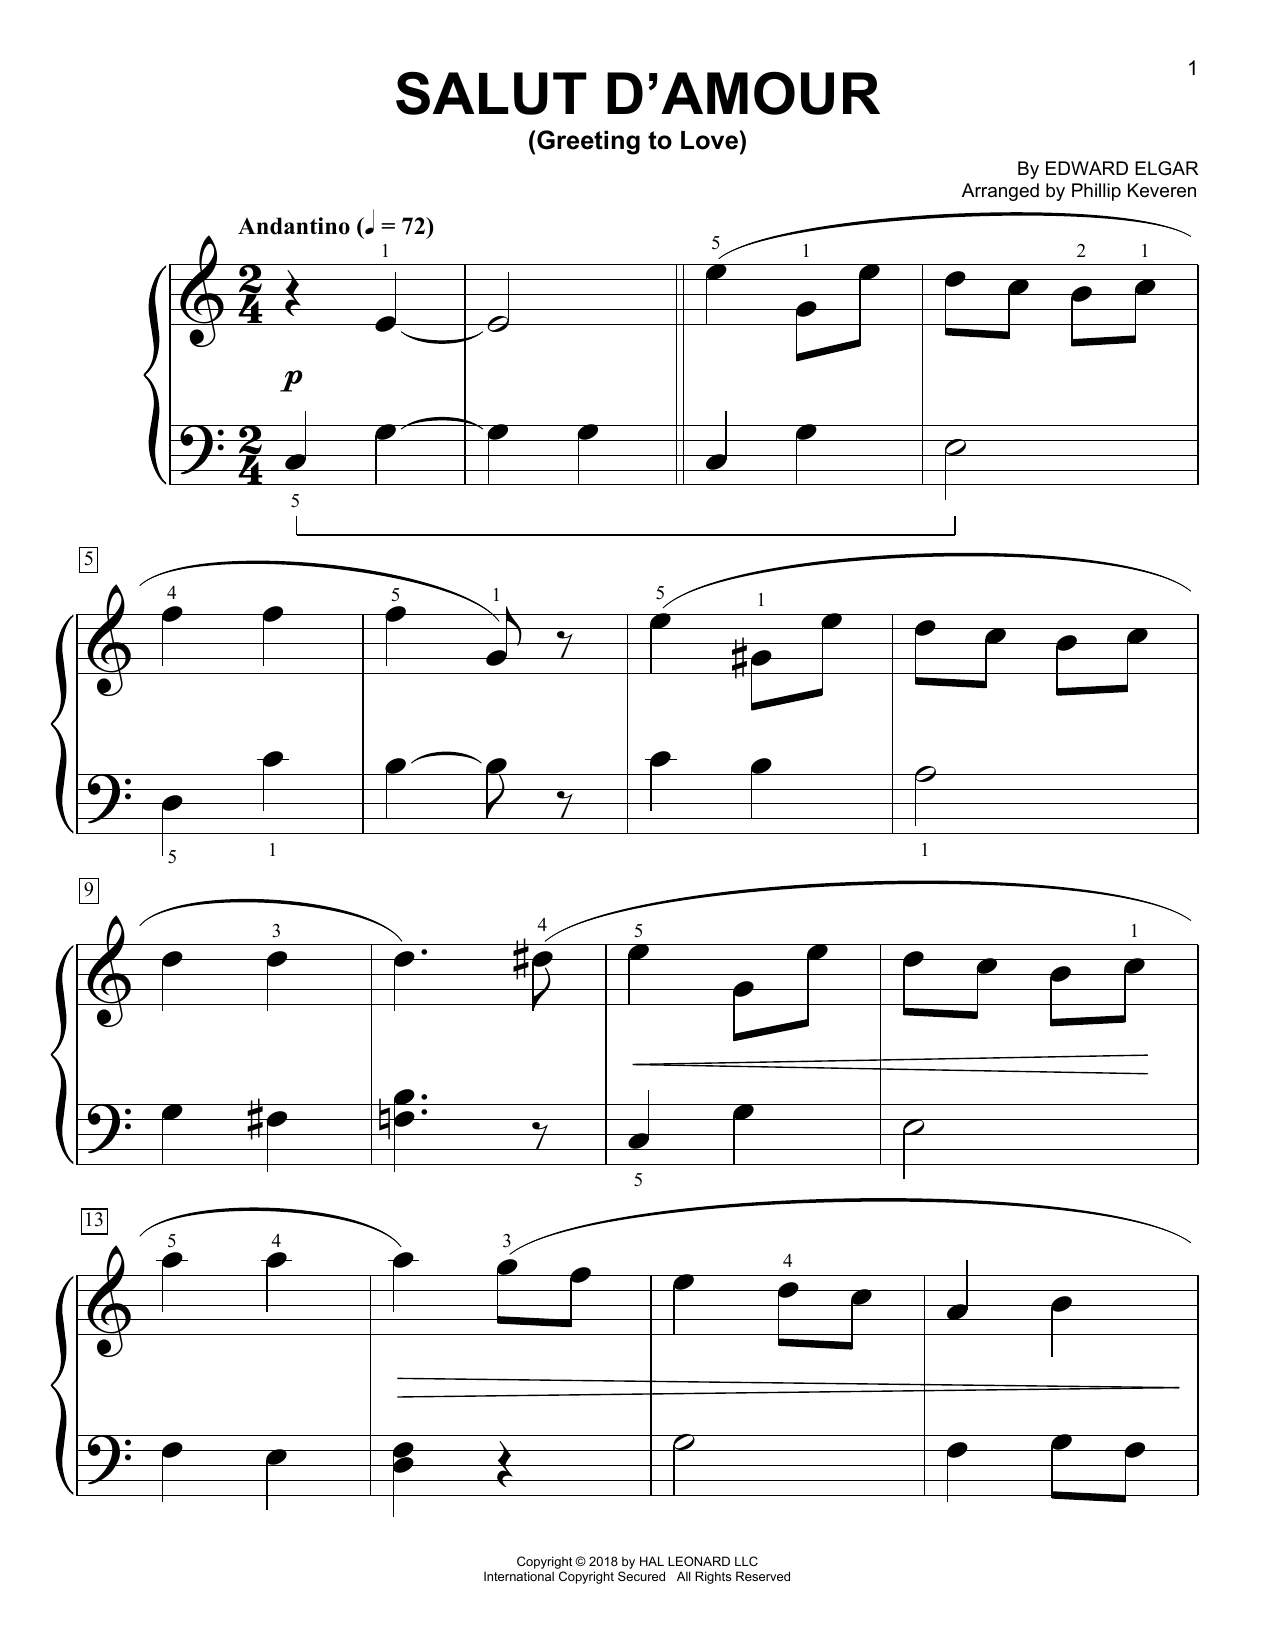 Download Phillip Keveren Salut D'amour (Greeting To Love) Sheet Music